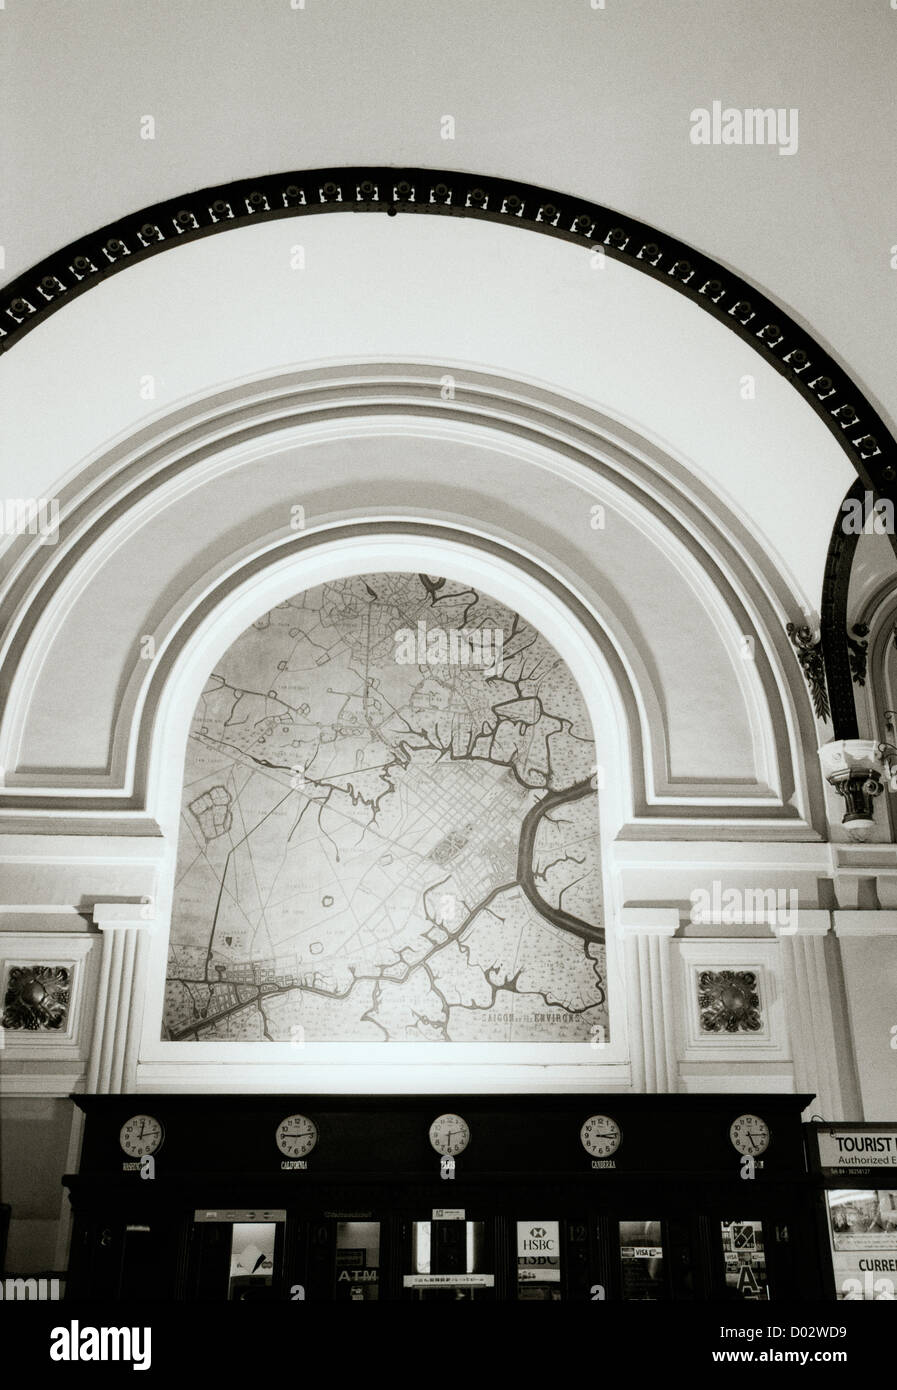 Map in Central Post Office in Saigon Ho Chi Minh City In Vietnam in Far East Southeast Asia. Architecture Maps World History Wanderlust Travel Stock Photo